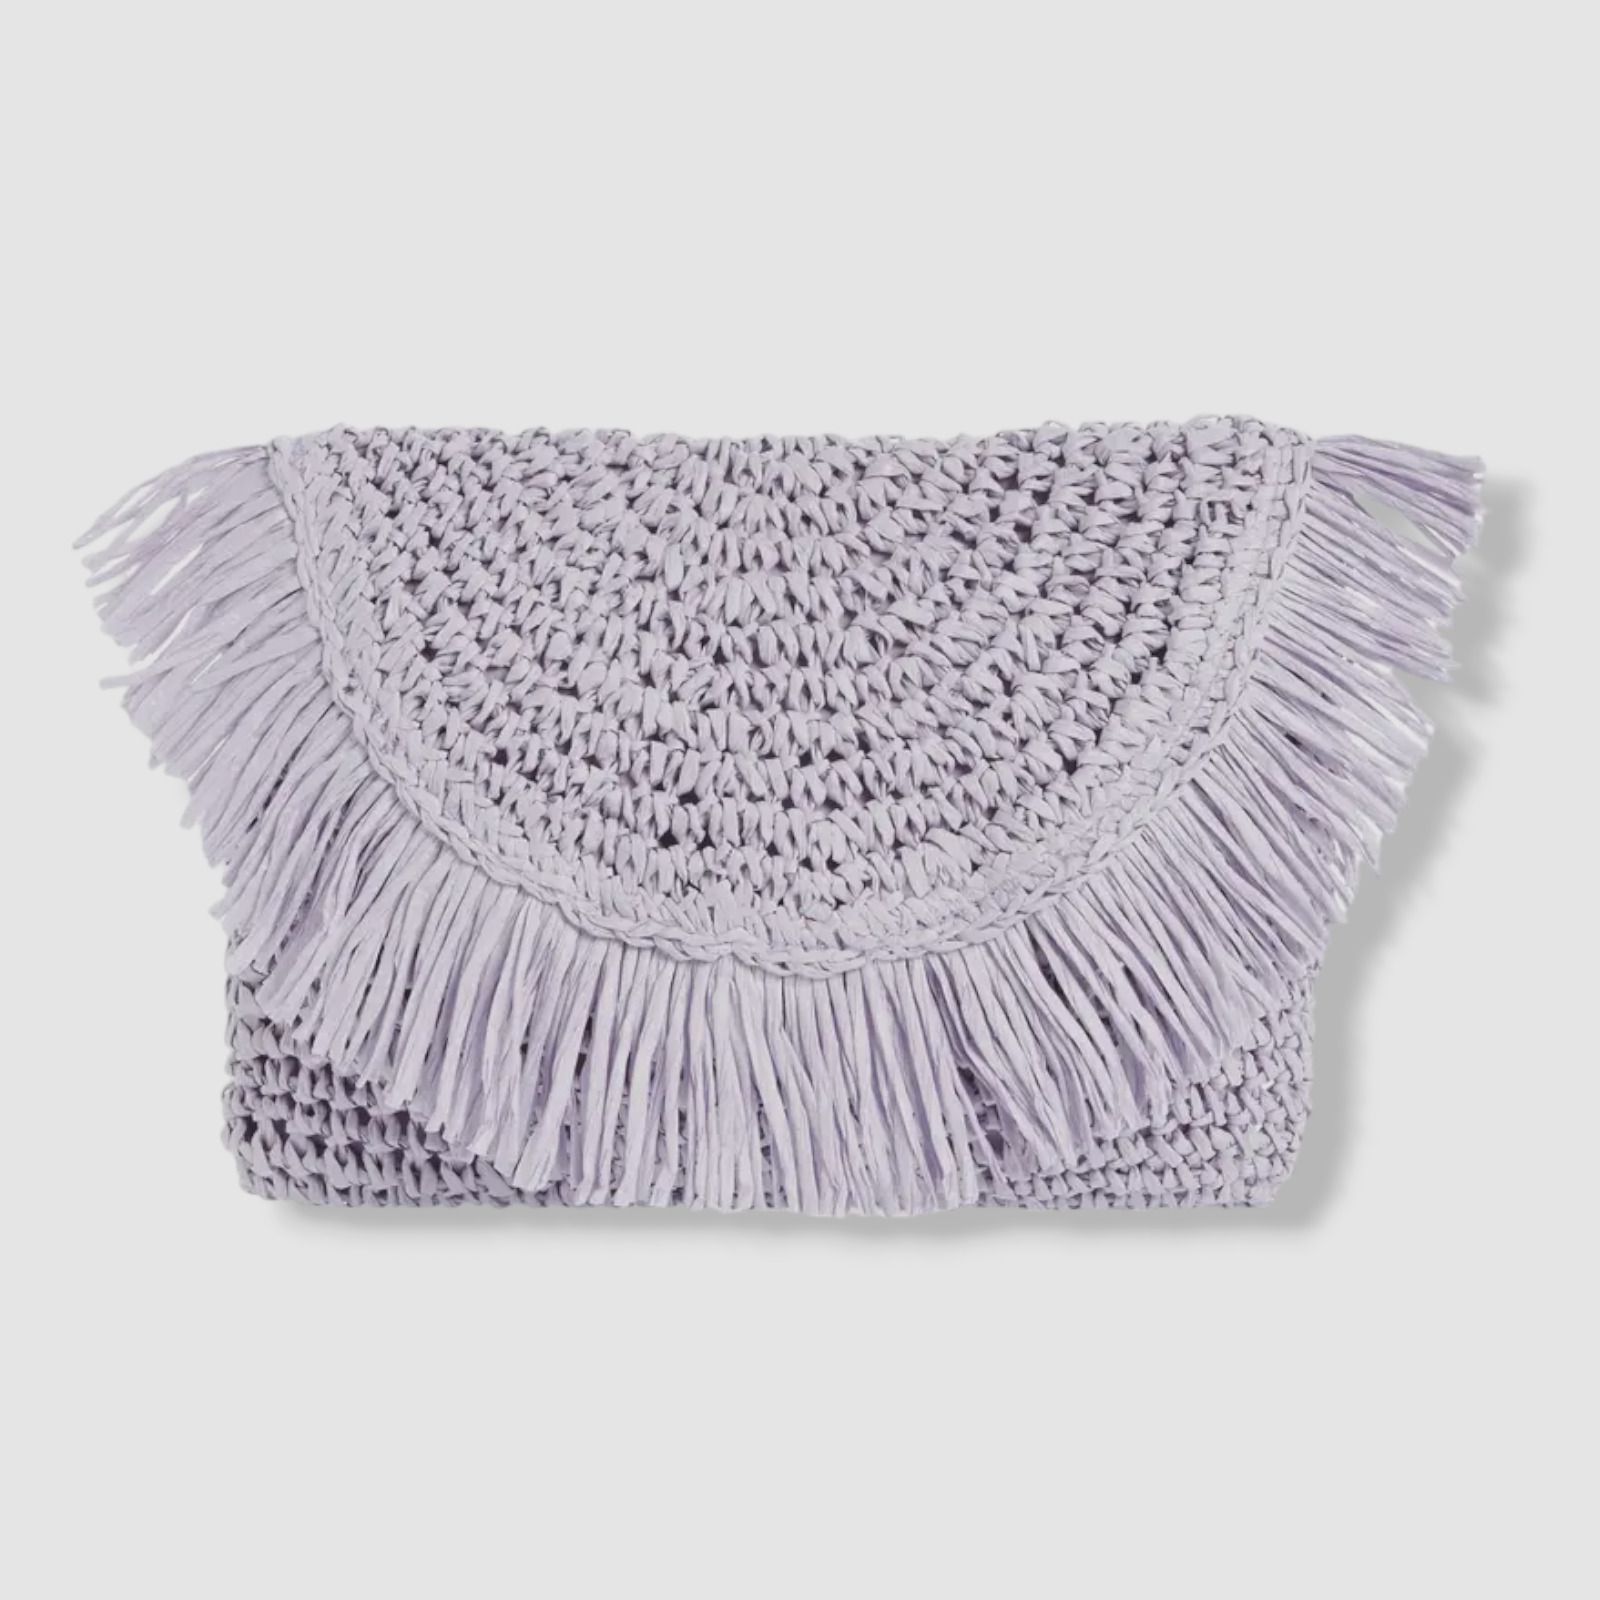 Fringed Clutch for look
  Stylish